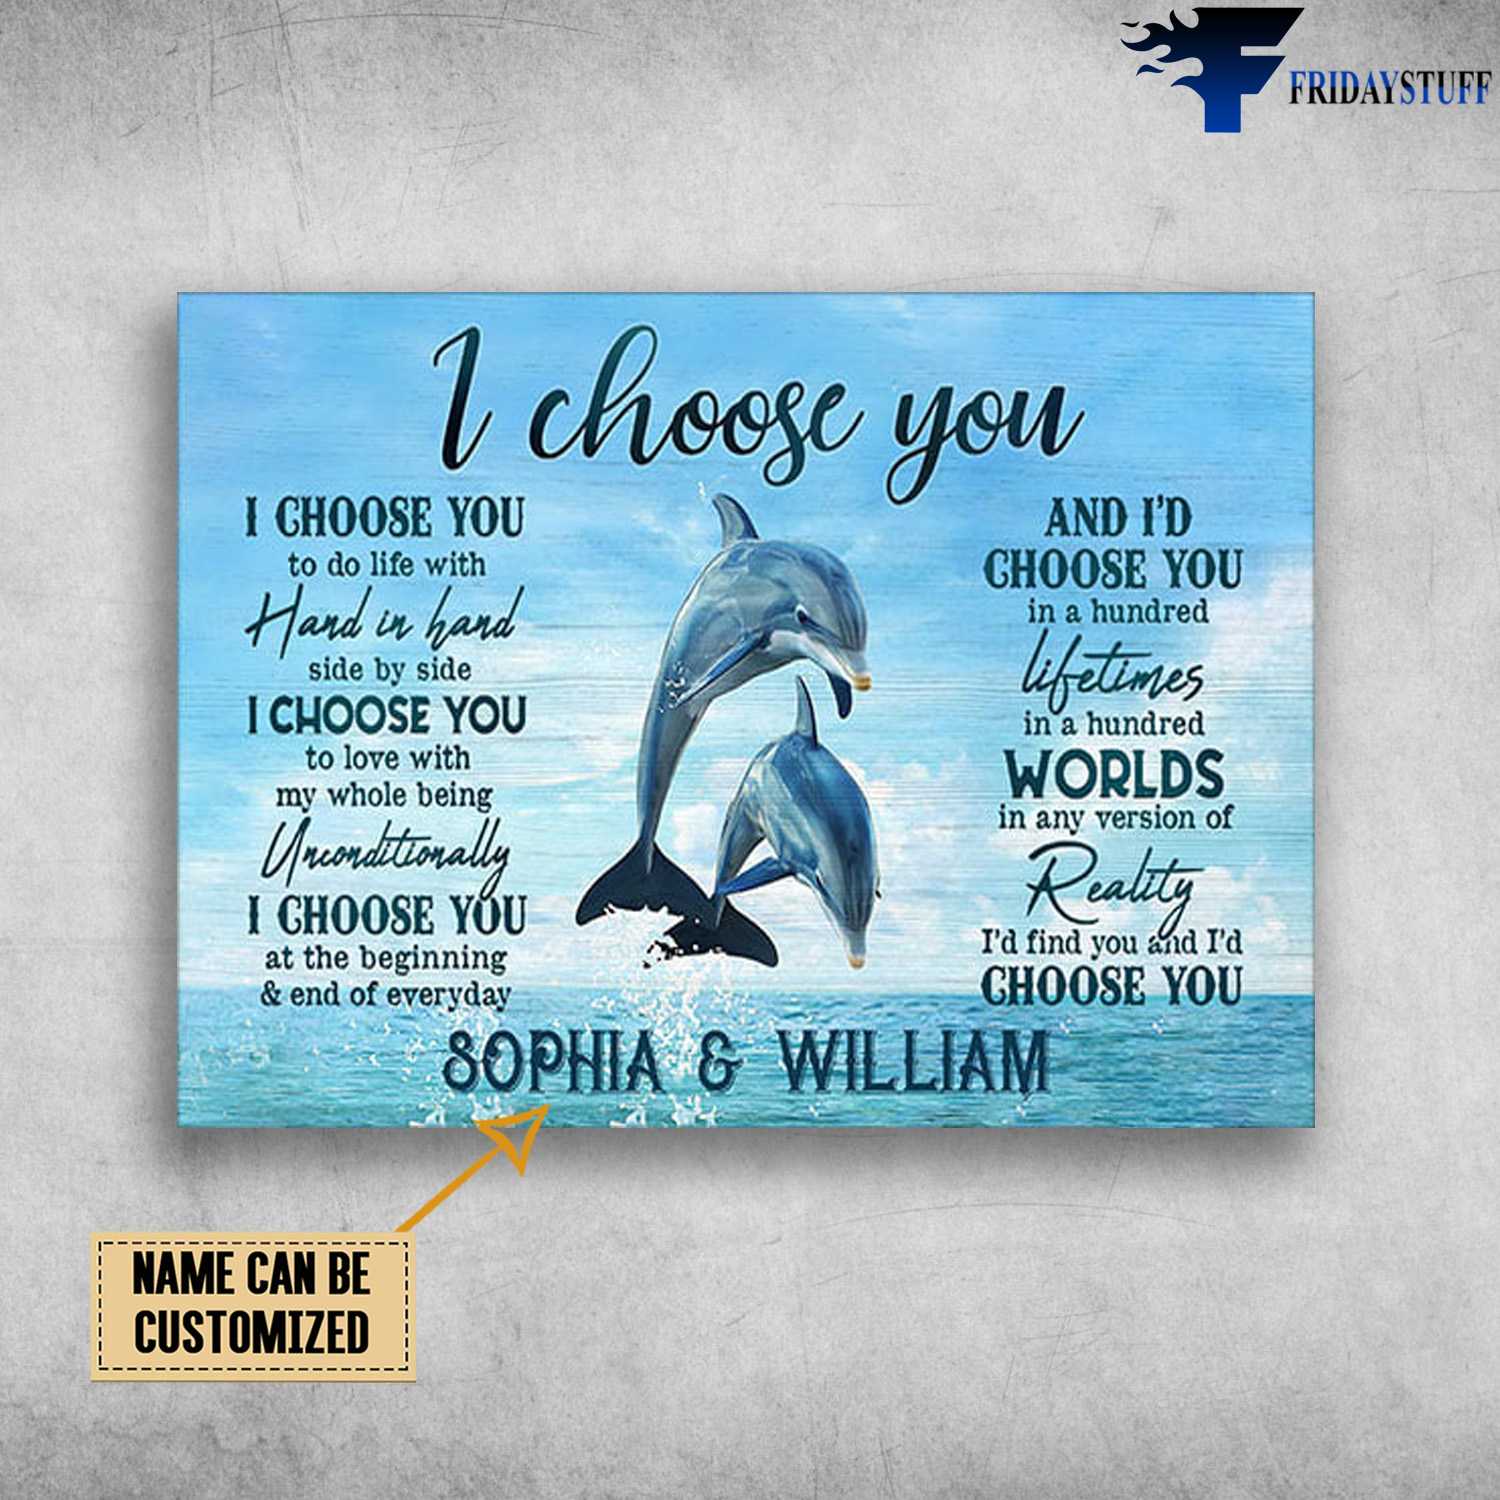 Couple Dolphin, I Choose You, To Do Life With Hand In Hand, Side By Side, I Choose You To Love With My Whole Being Unconditionally, I Choose You, At The Beginning And End Of Everyday